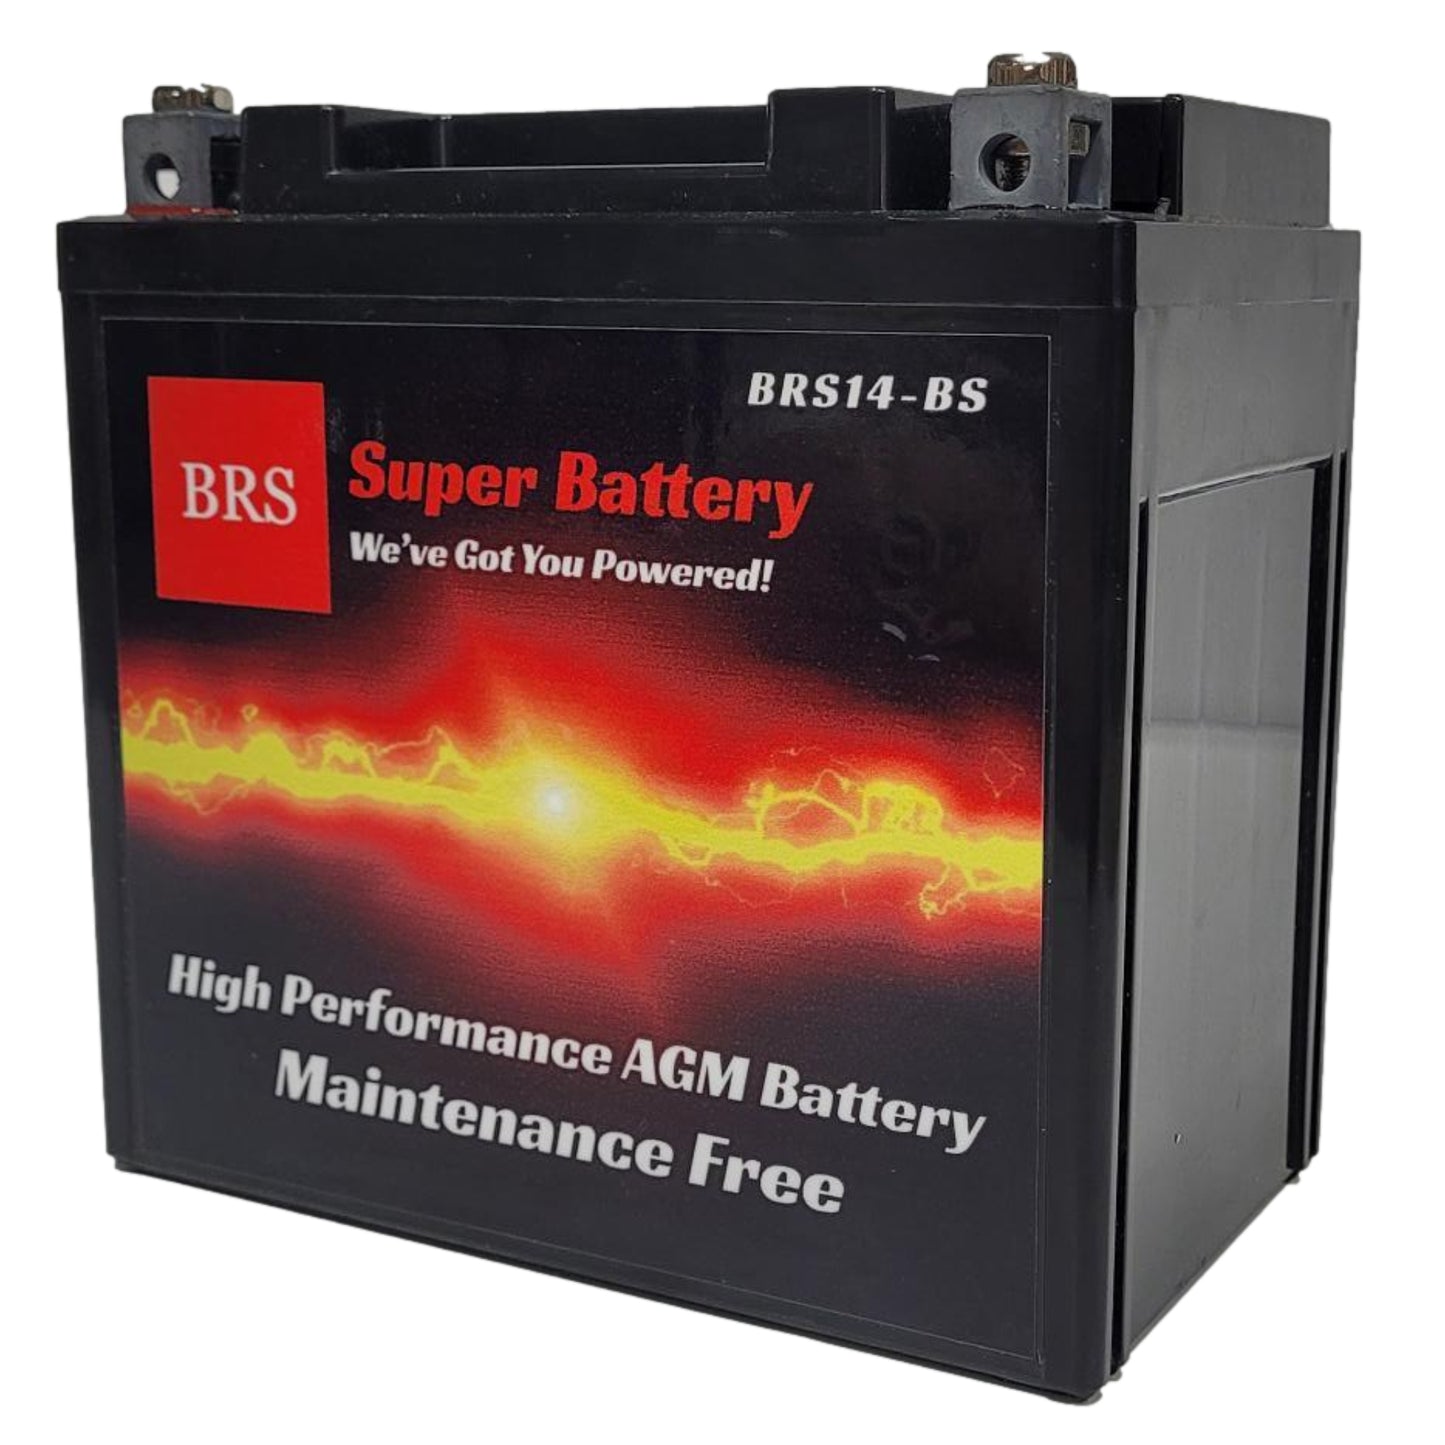 WPX14-BS 12v High Performance Sealed AGM PowerSport 10 Year Battery - BRS Super Battery